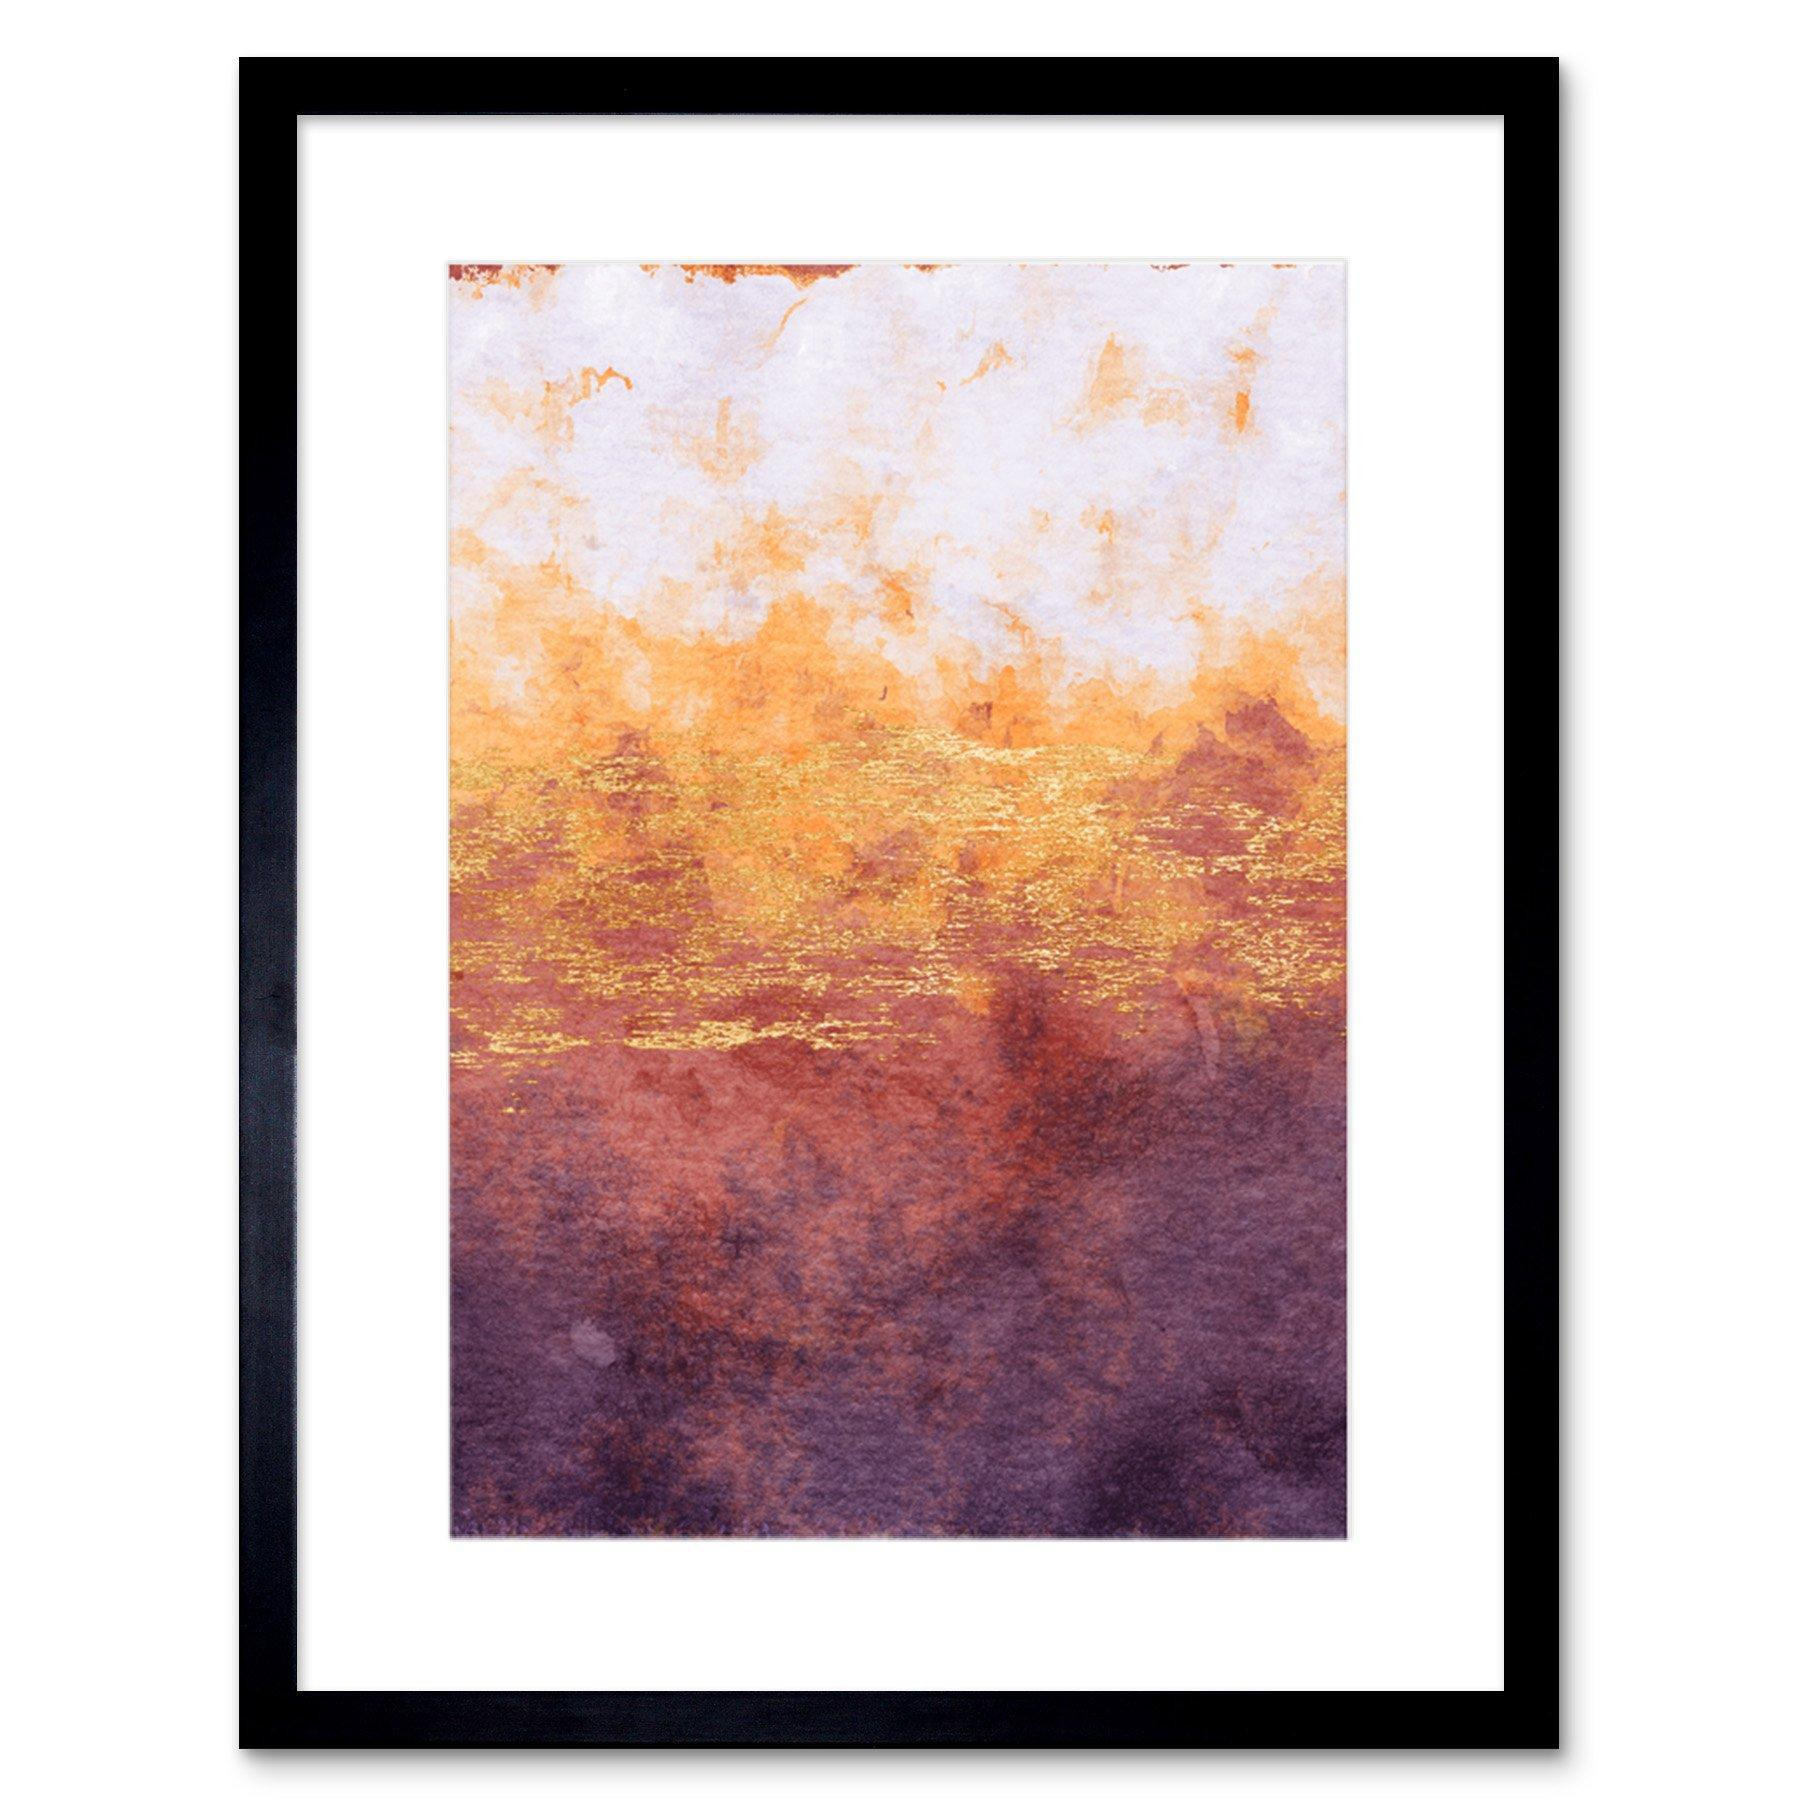 Abstract Purple Yellow Gold Watercolour Art Print Framed Poster Wall Decor 9x7 inch - image 1